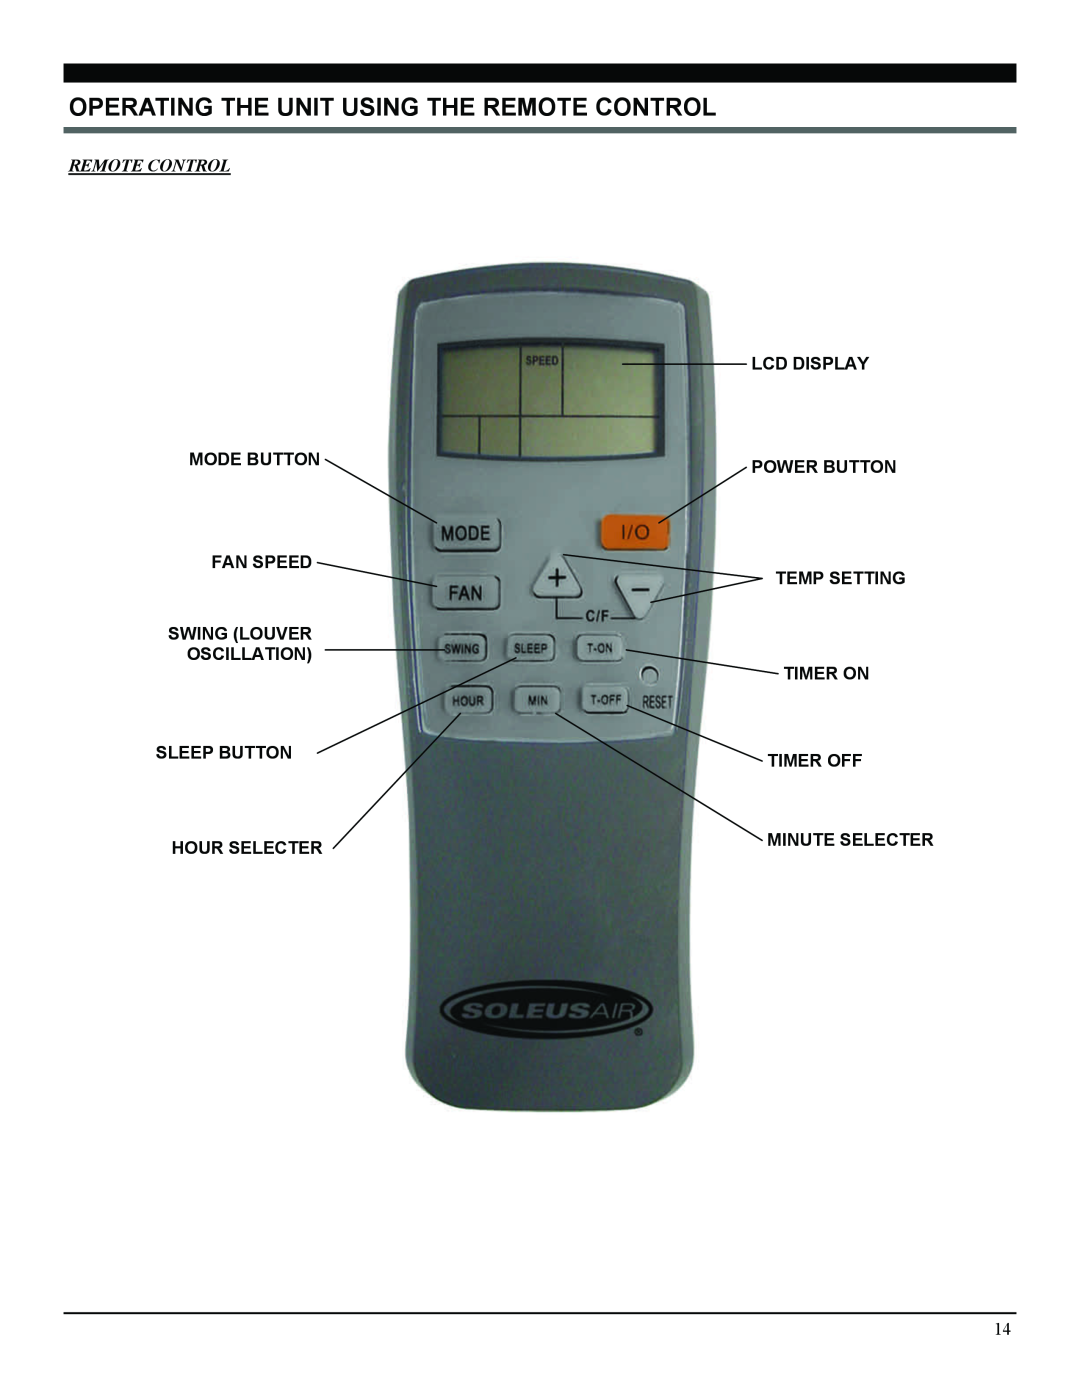 Soleus Air PA1-10R-32, 3046364 Operating The Unit Using The Remote Control, Mode Button Fan Speed Swing Louver Oscillation 